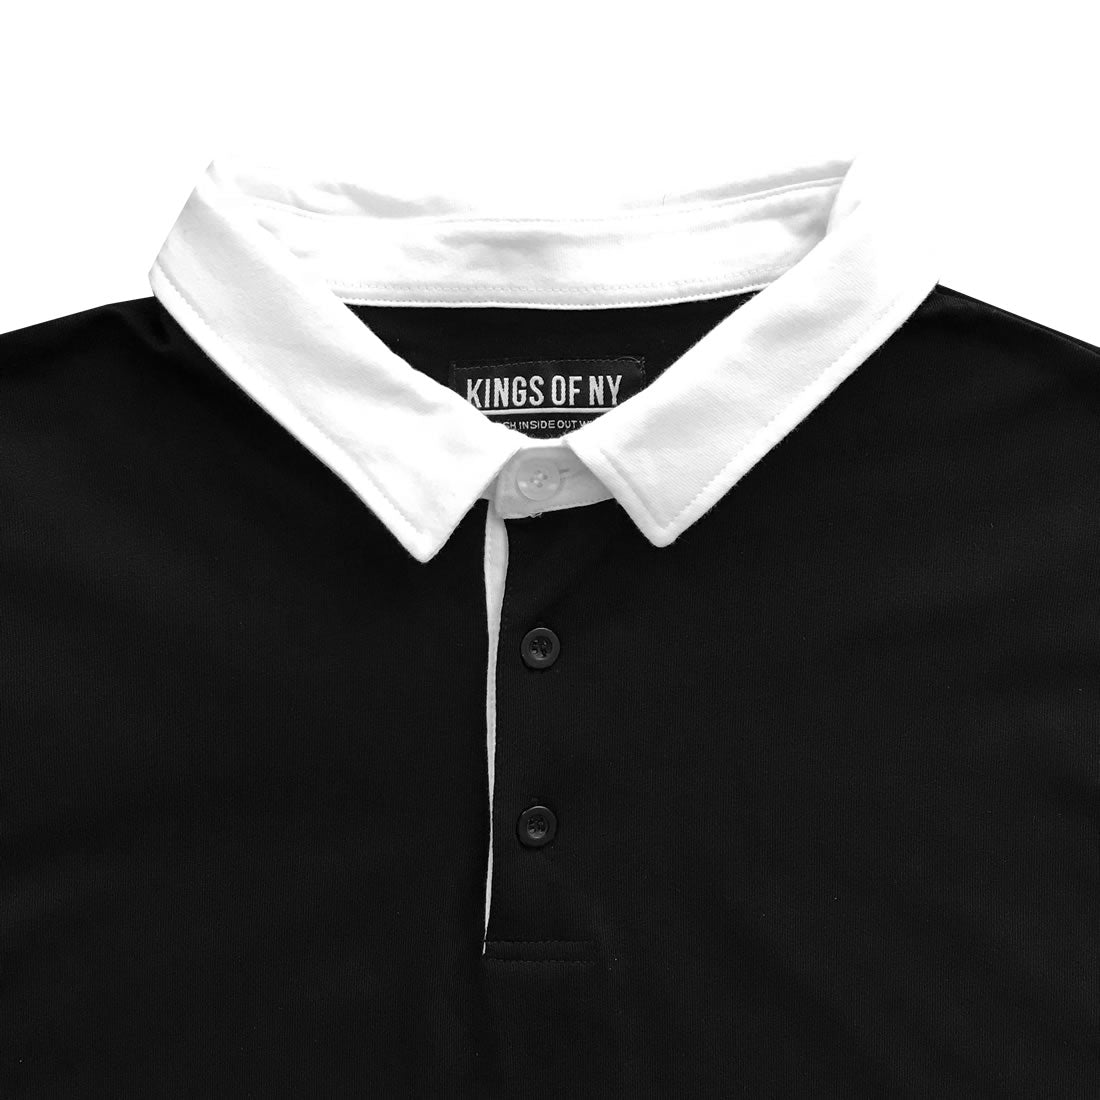 Black with White Collar Mens Short Sleeve Rugby Shirt